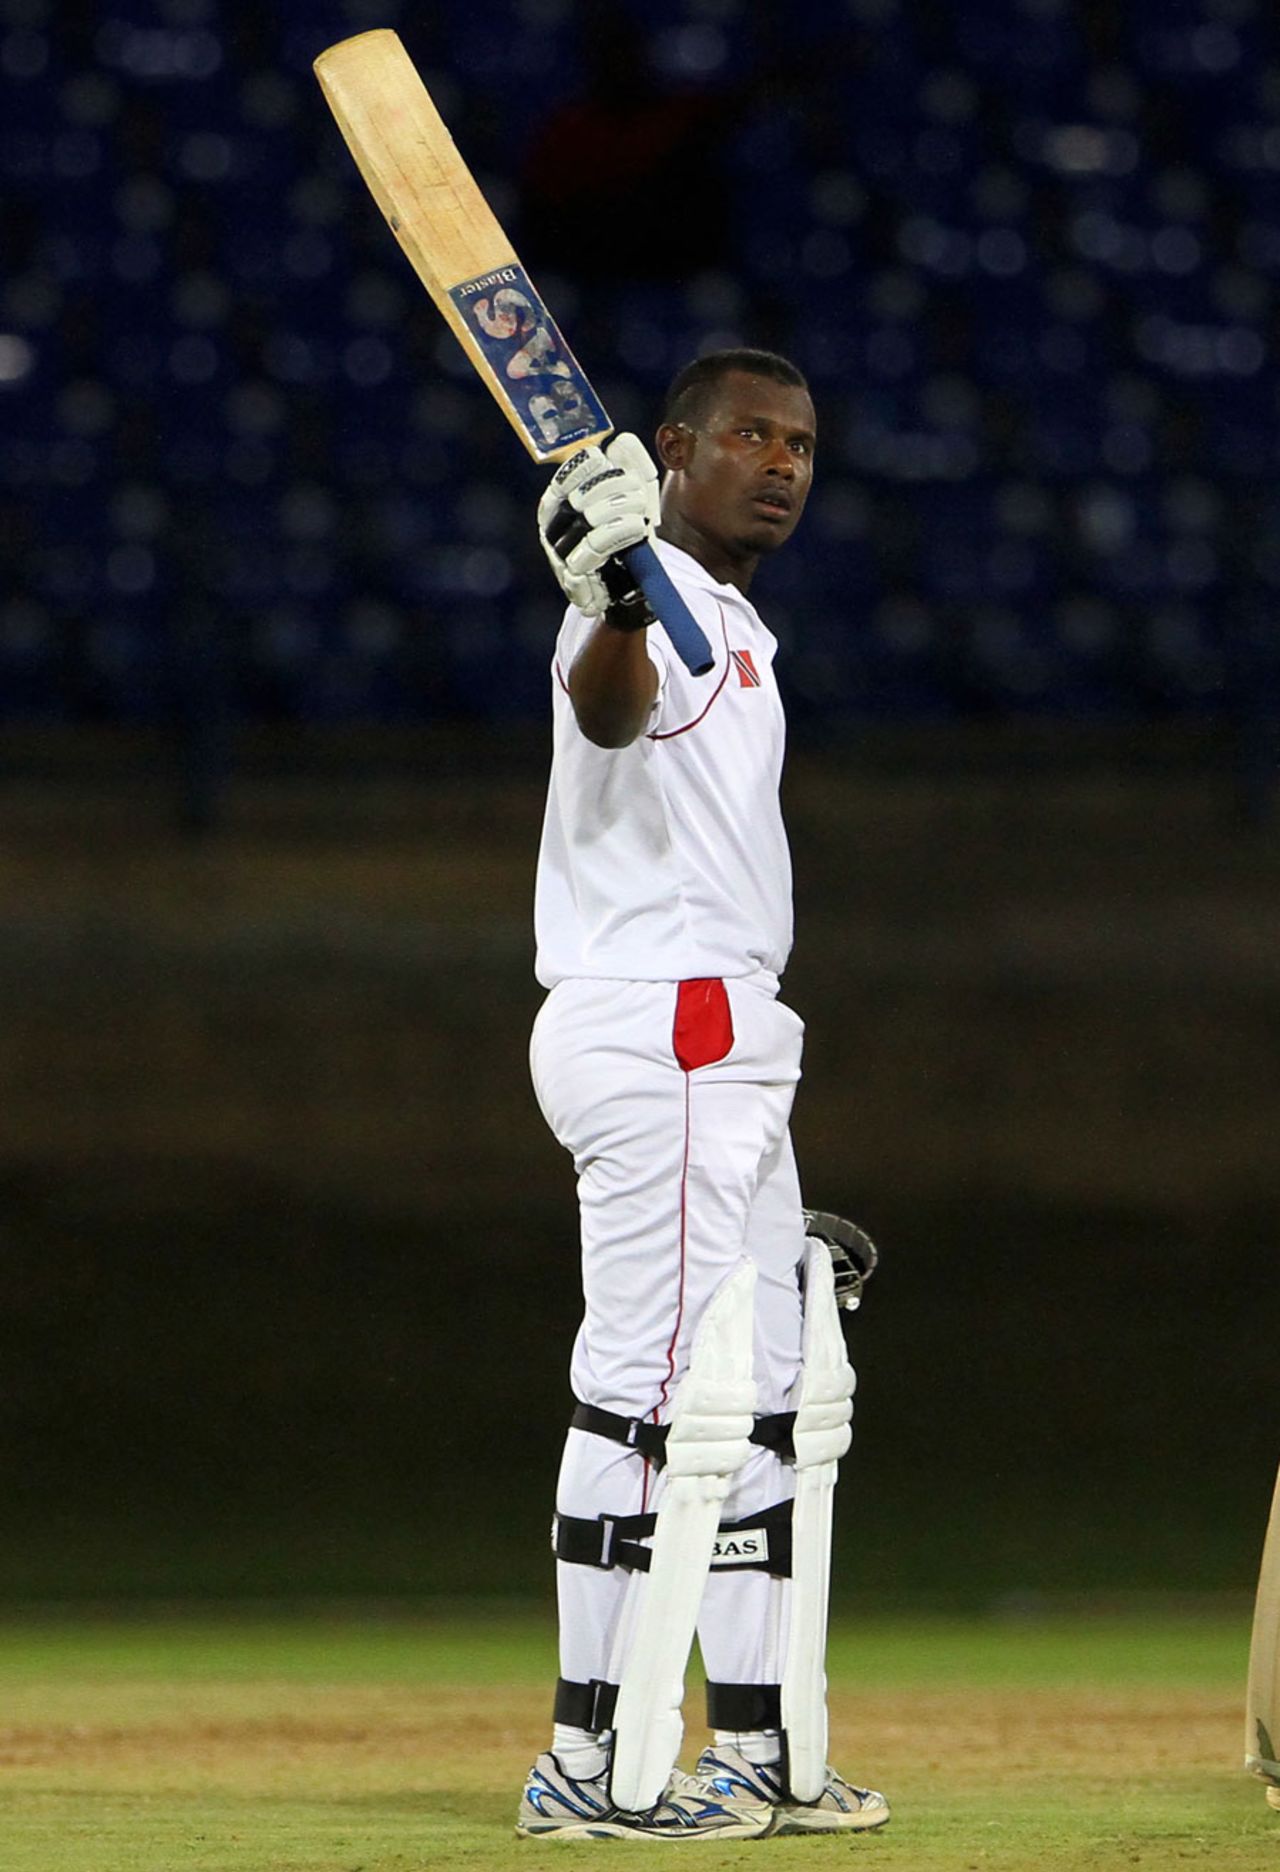 Jason Mohammed is not out on a career-best 149, Trinidad & Tobago v Combined Campuses and Colleges, Regional Four Day Competition, Port of Spain, March 28, 2014, Day 1